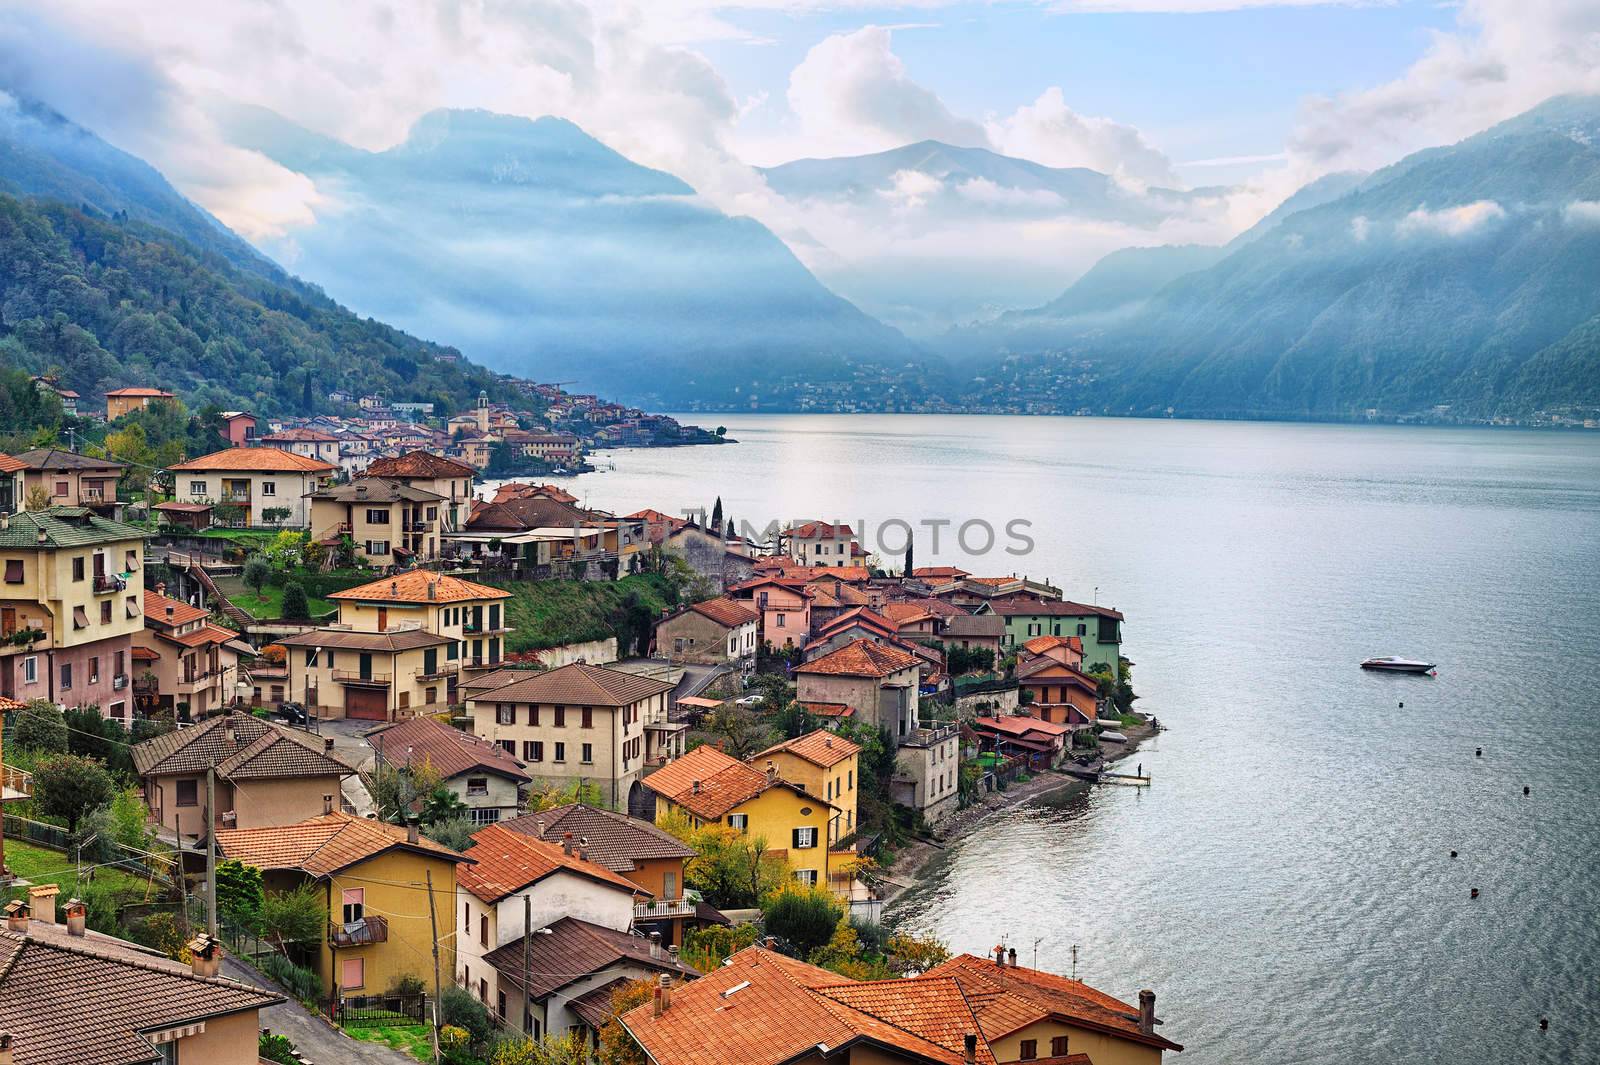 View of Lake Como, Milan, northern Italy by GlobePhotos